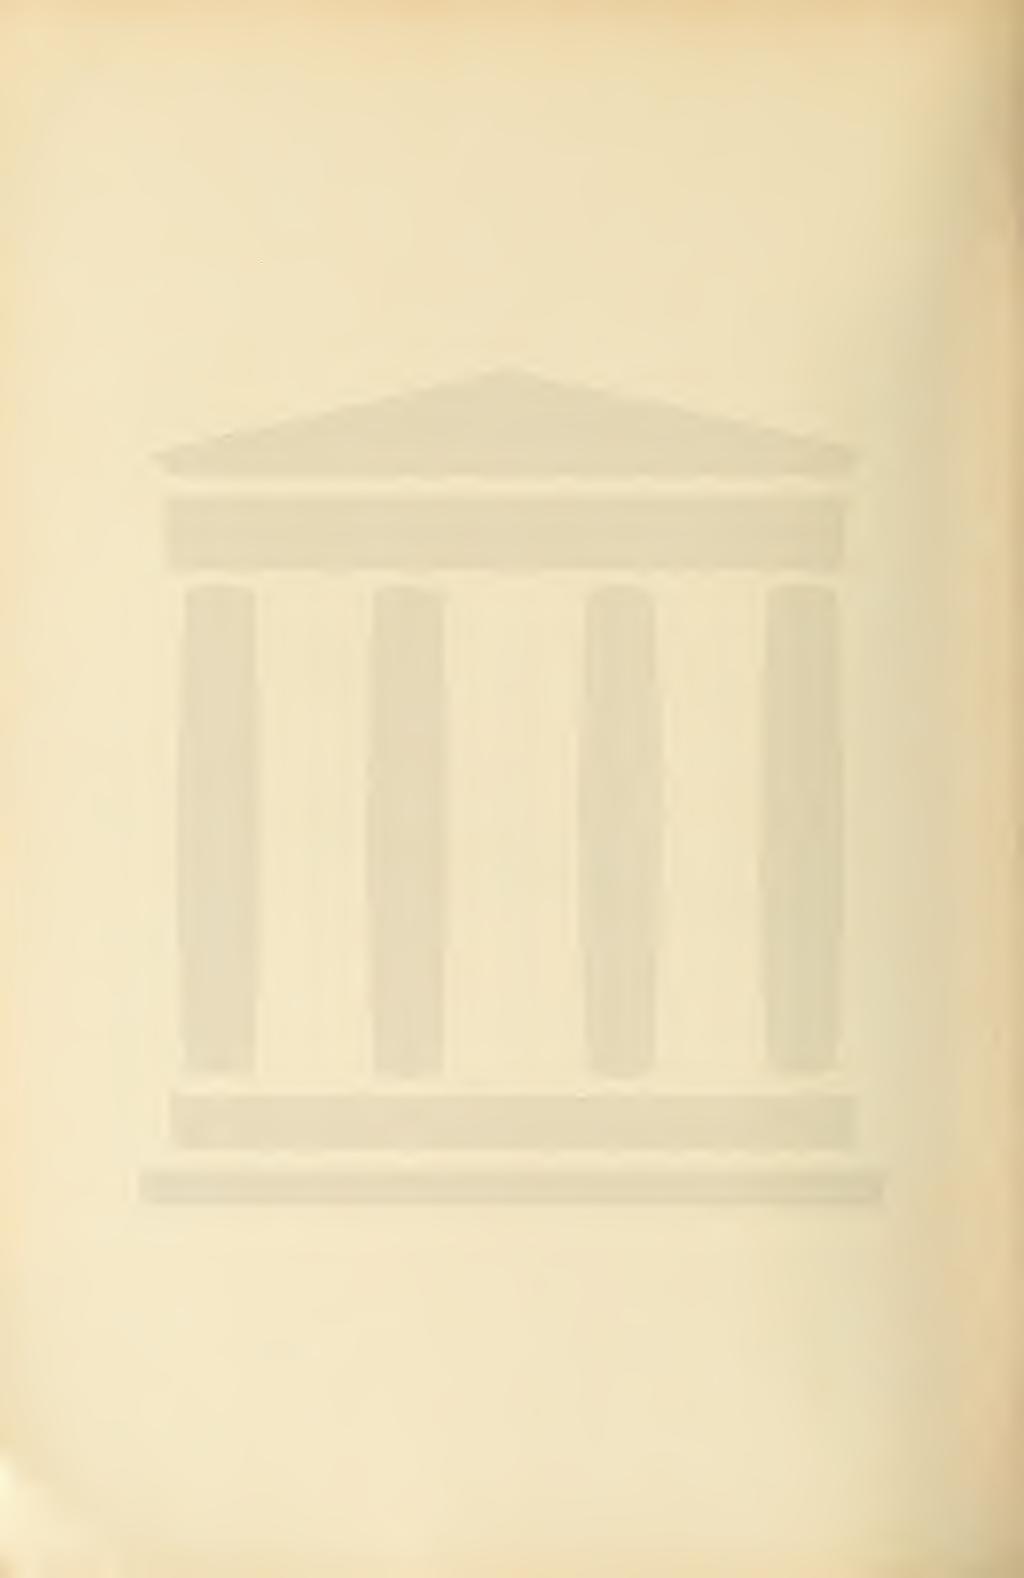 Digitized by the Internet Archive in 2012 with